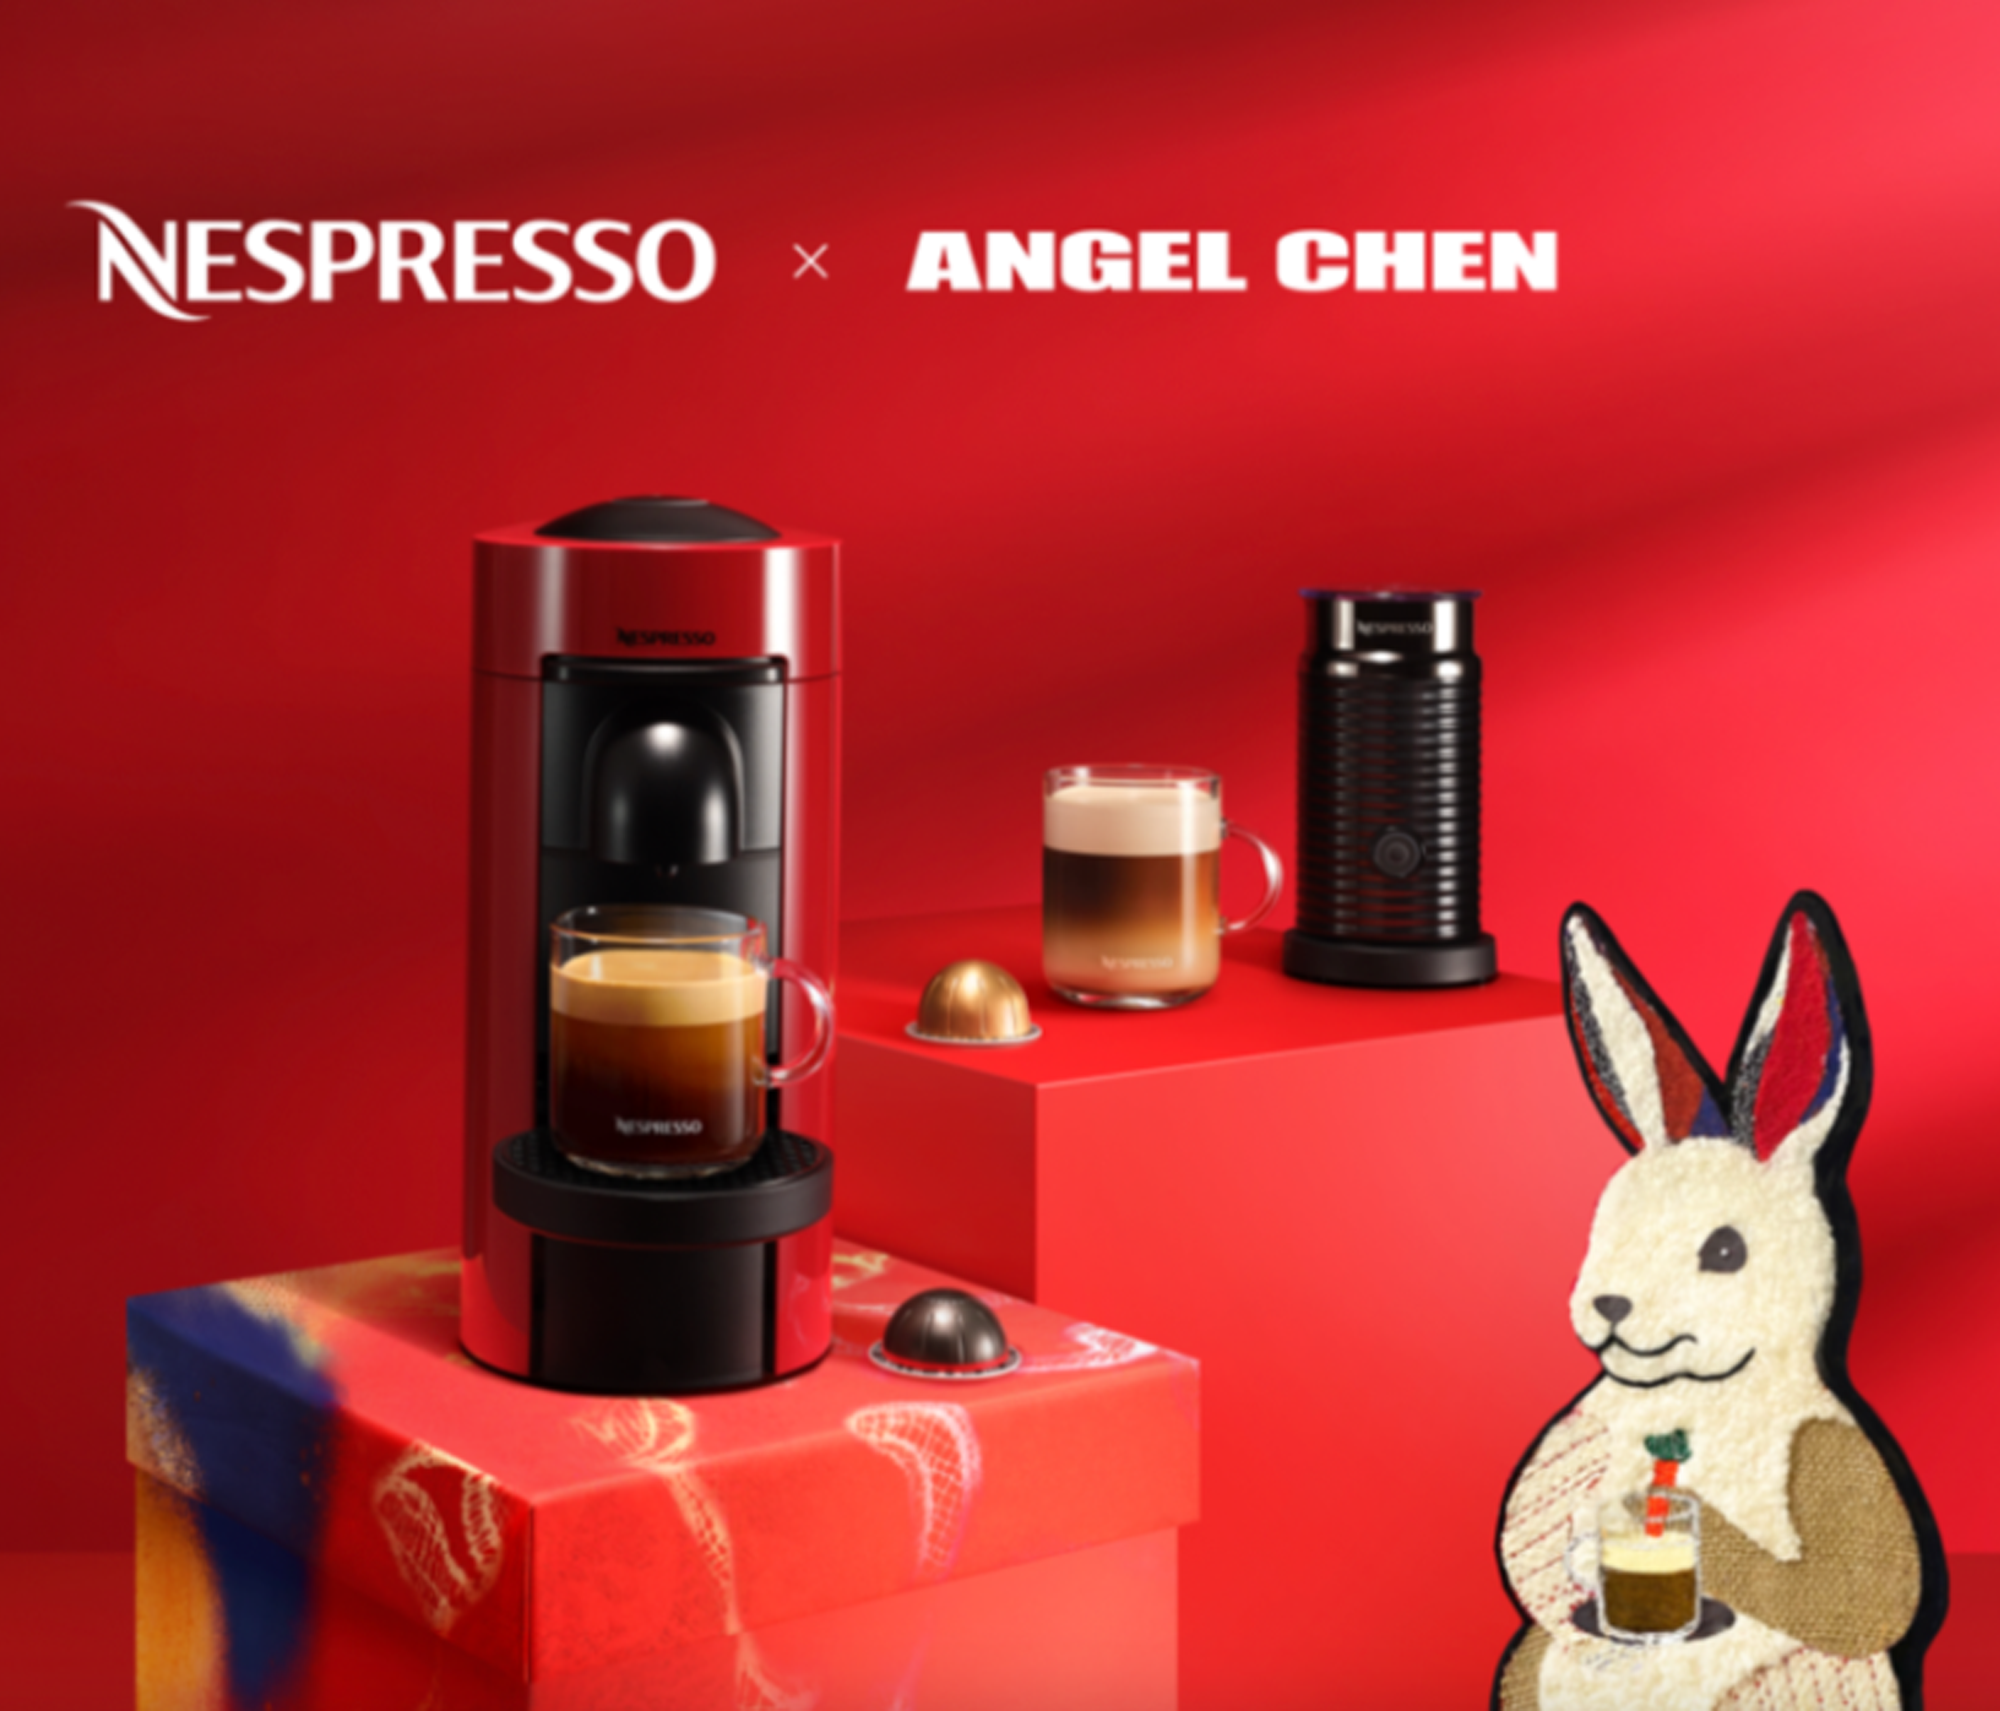 NESPRESSO X ANGEL CHEN LIMITED EDITION FOR THE YEAR OF RABBIT